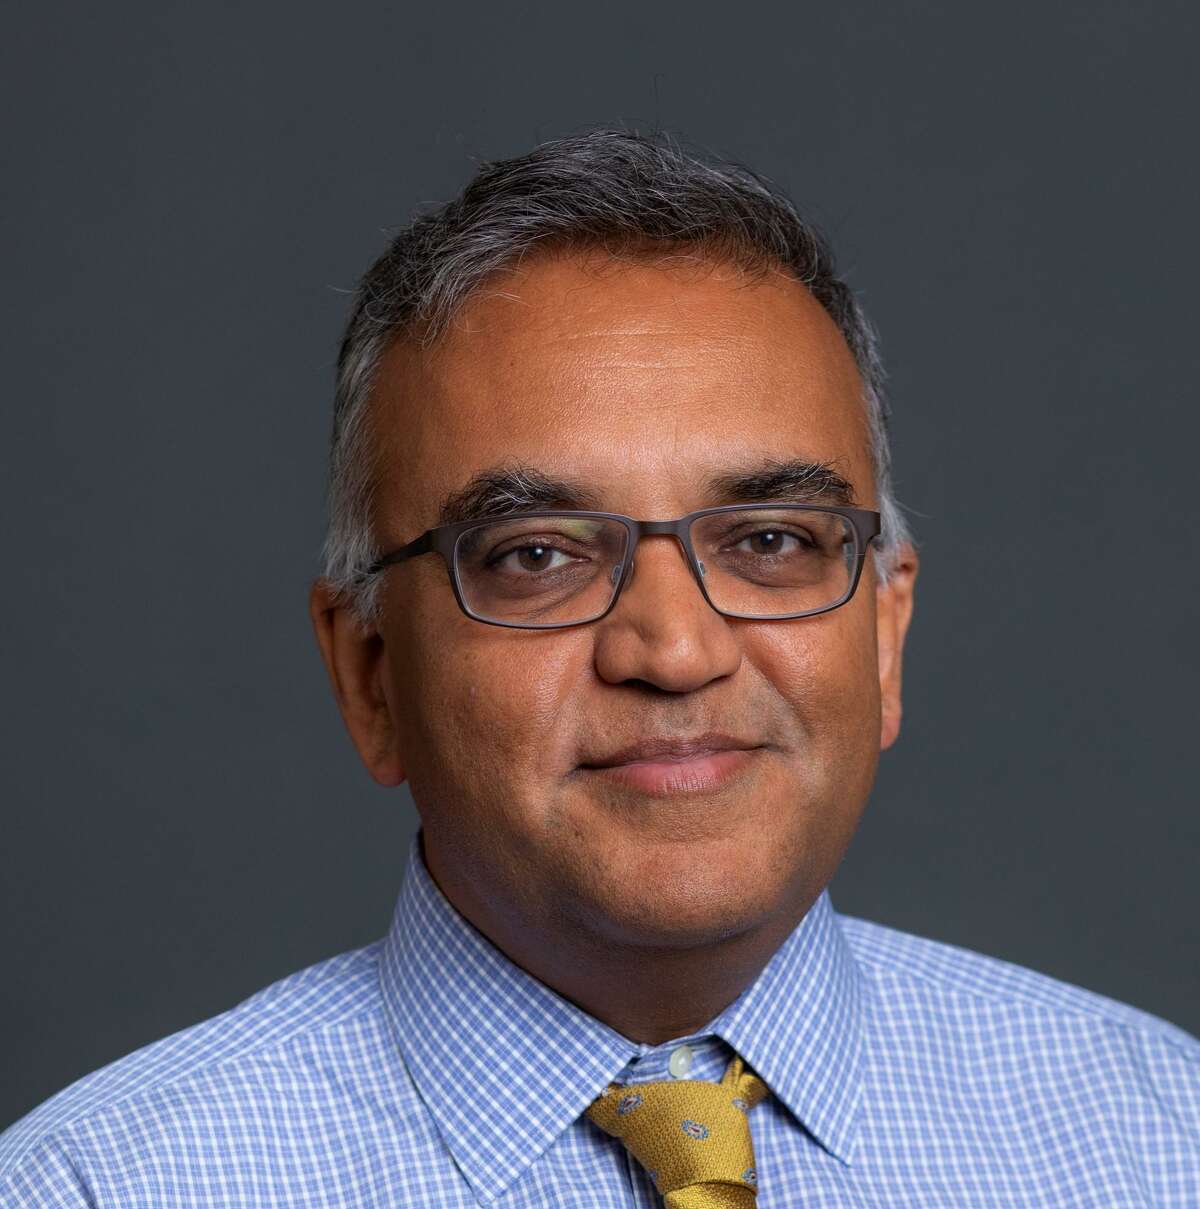 Dr. Ashish Jha, dean of the Brown University School of Public Health, spoke about vaccines, variants and other COVID-related topics during a webinar on April 14, 2021. The event was sponsored by the Hartford-based Travelers Institute, the public policy division of The Travelers Companies, Inc.